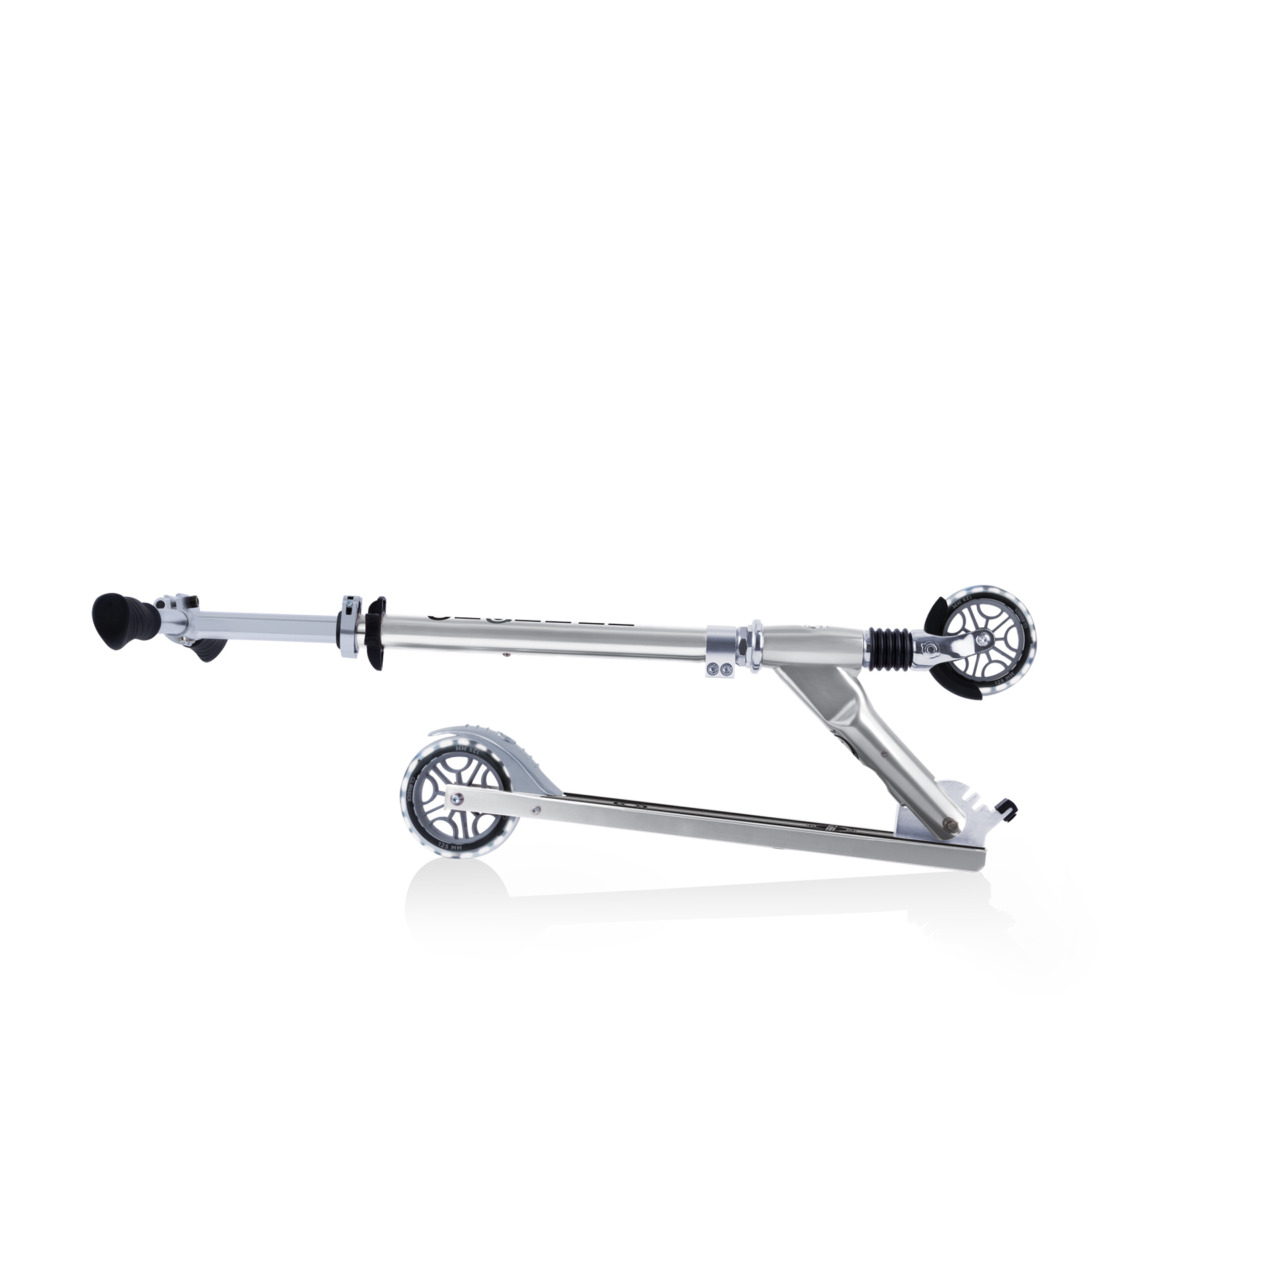 727 130 Foldable Scooter With Light